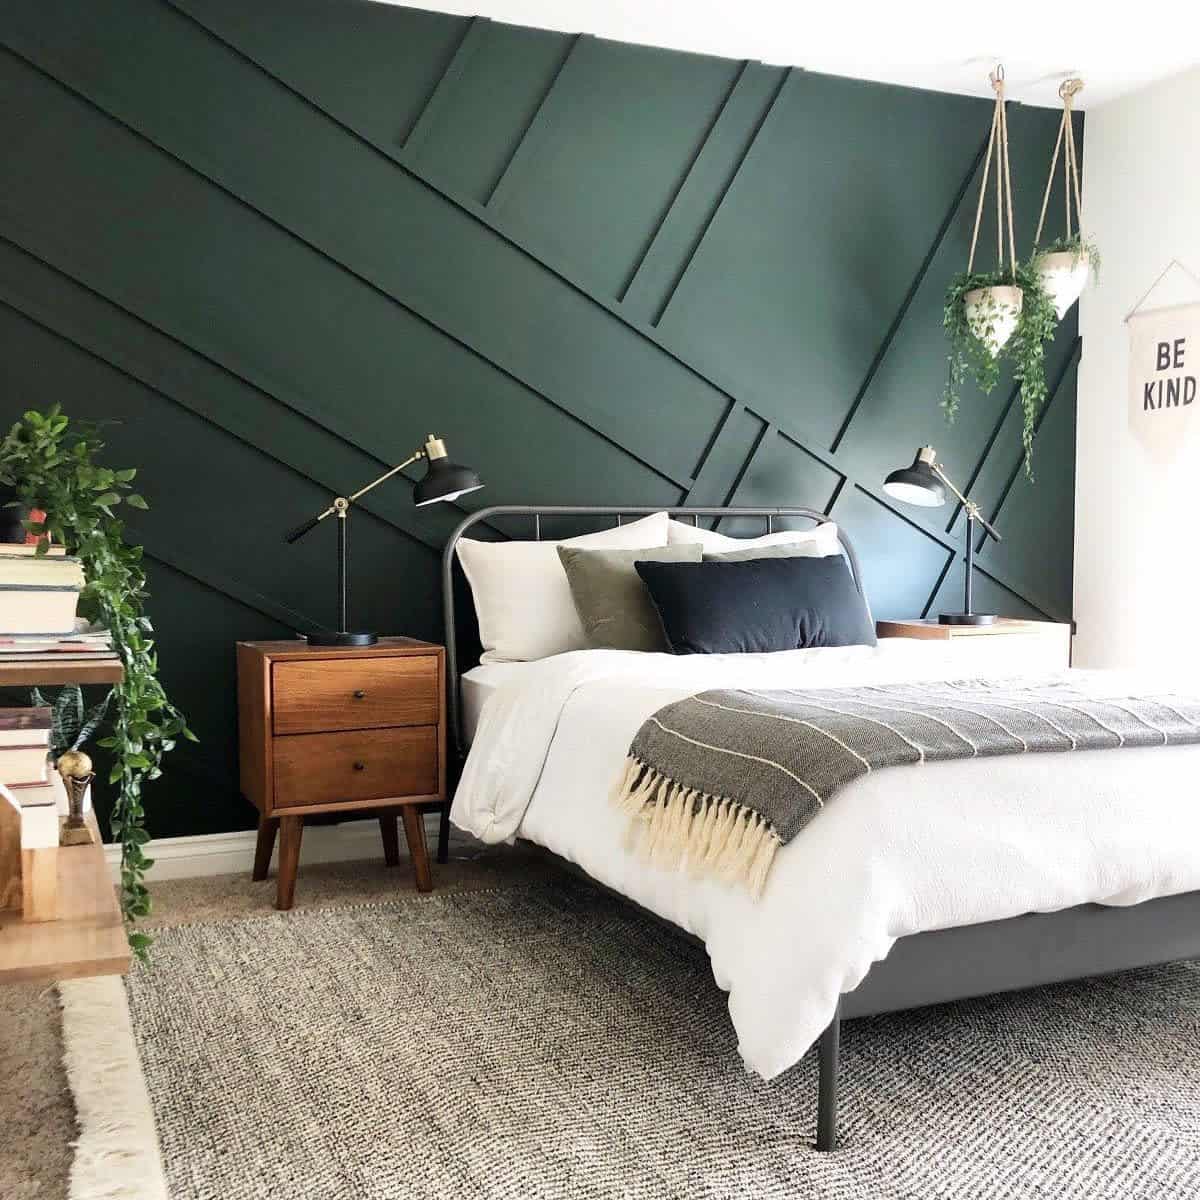 Modern bedroom, green accent wall, gray bed frame, hanging potted plants, wooden bedside table 